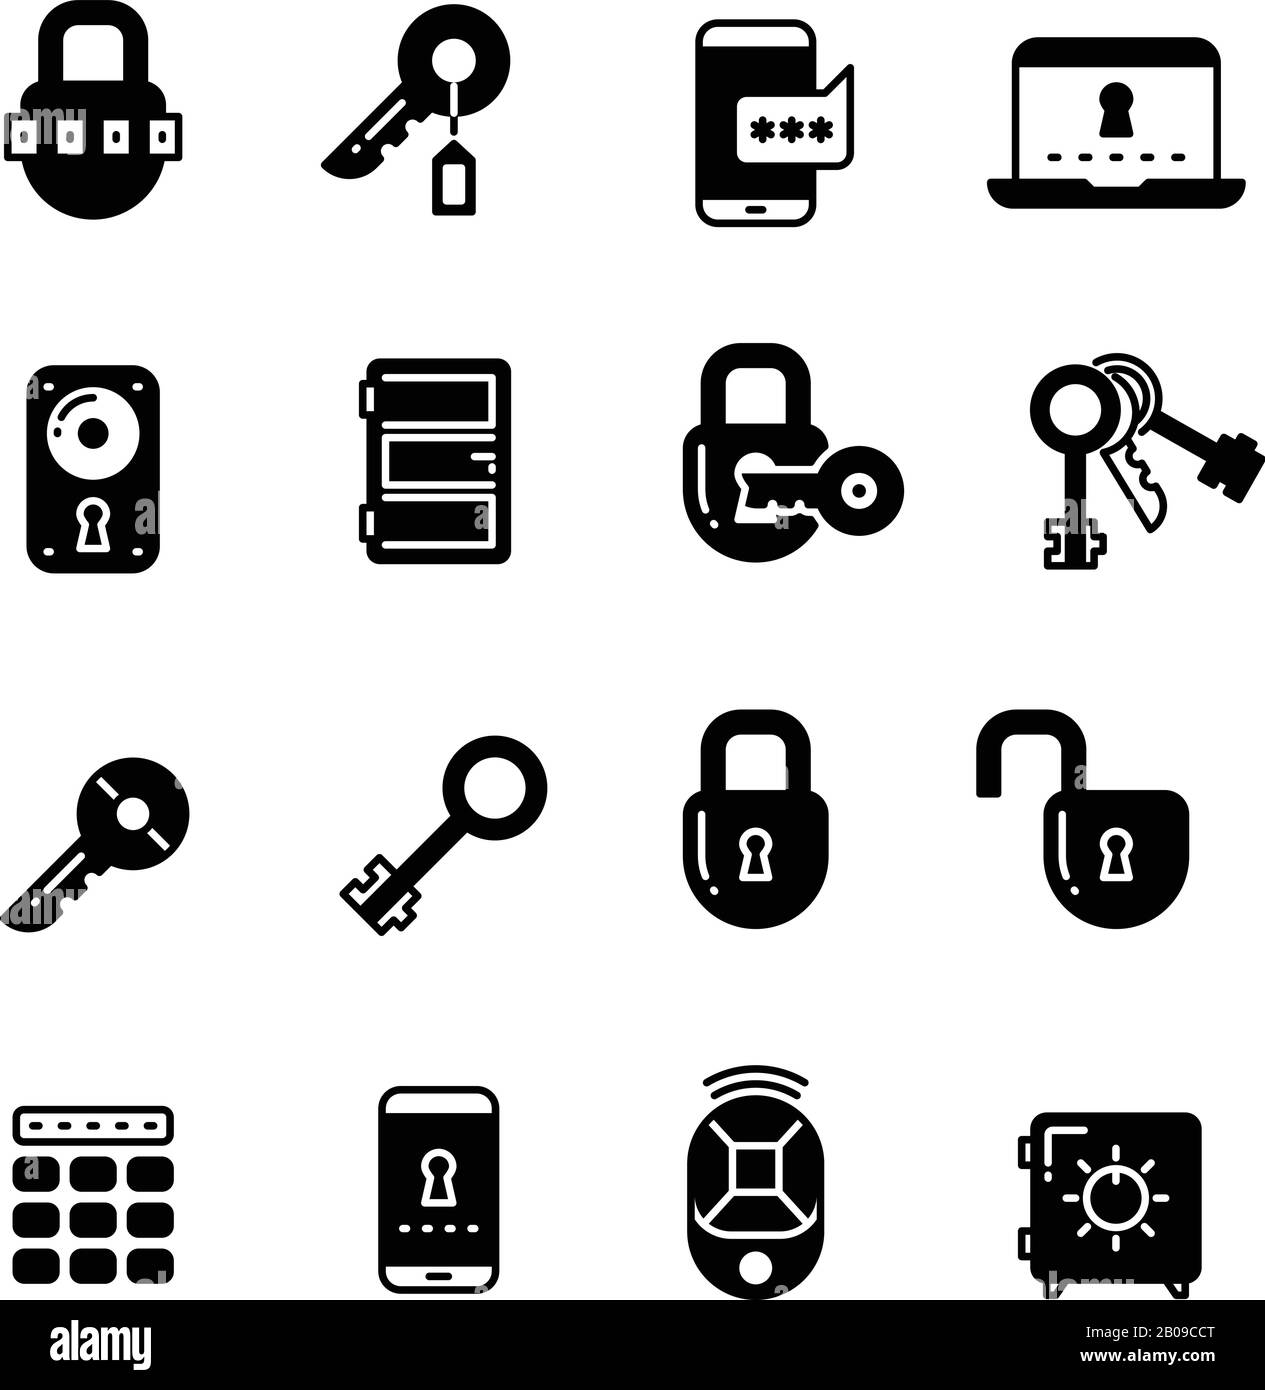 Key and lock, web access security, safe internet vector icons. Protection and lock, security and safety interner illustration Stock Vector